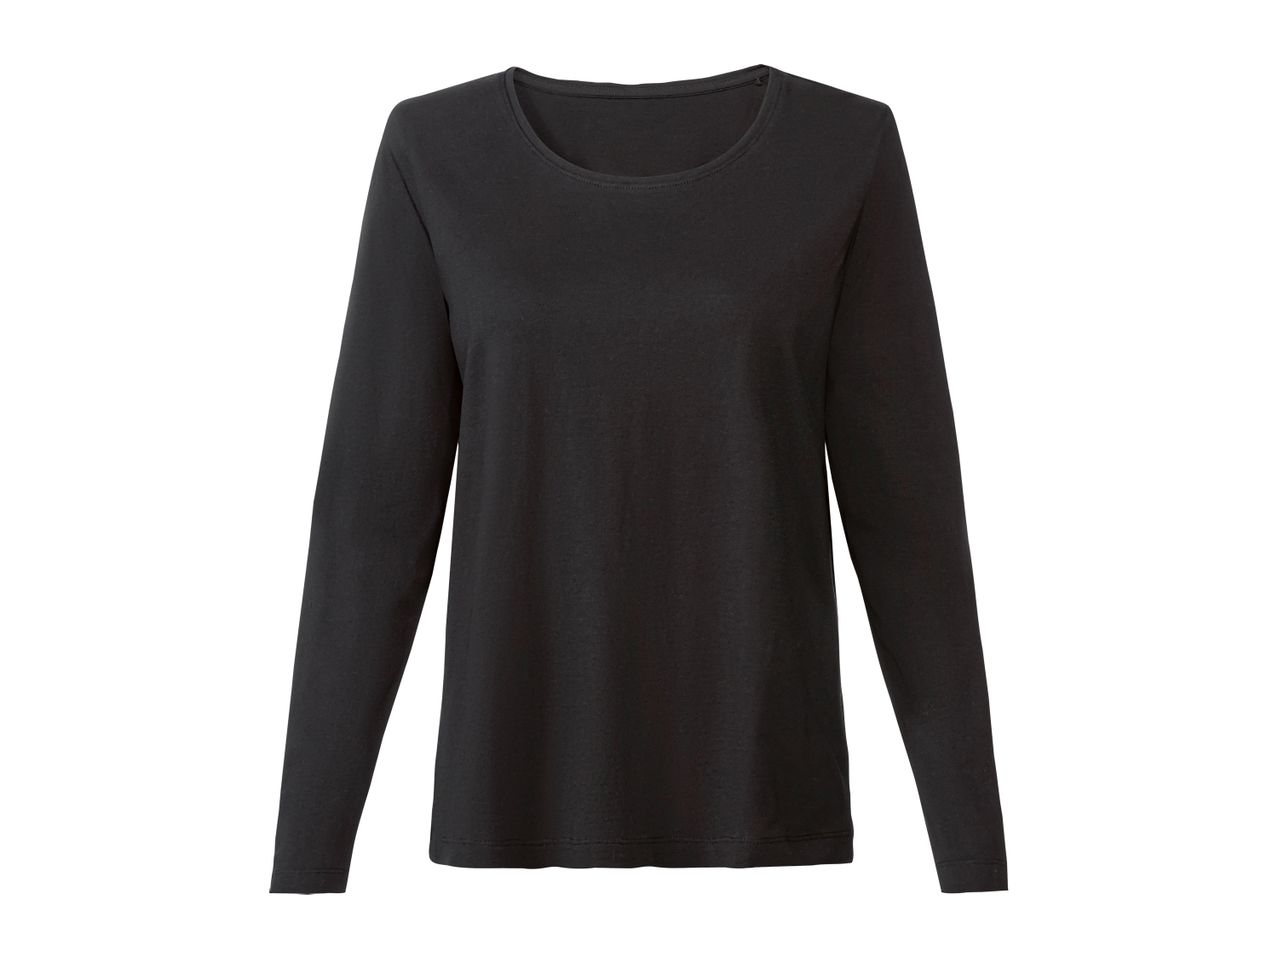 Go to full screen view: Ladies’ Long Sleeve Top - Image 1